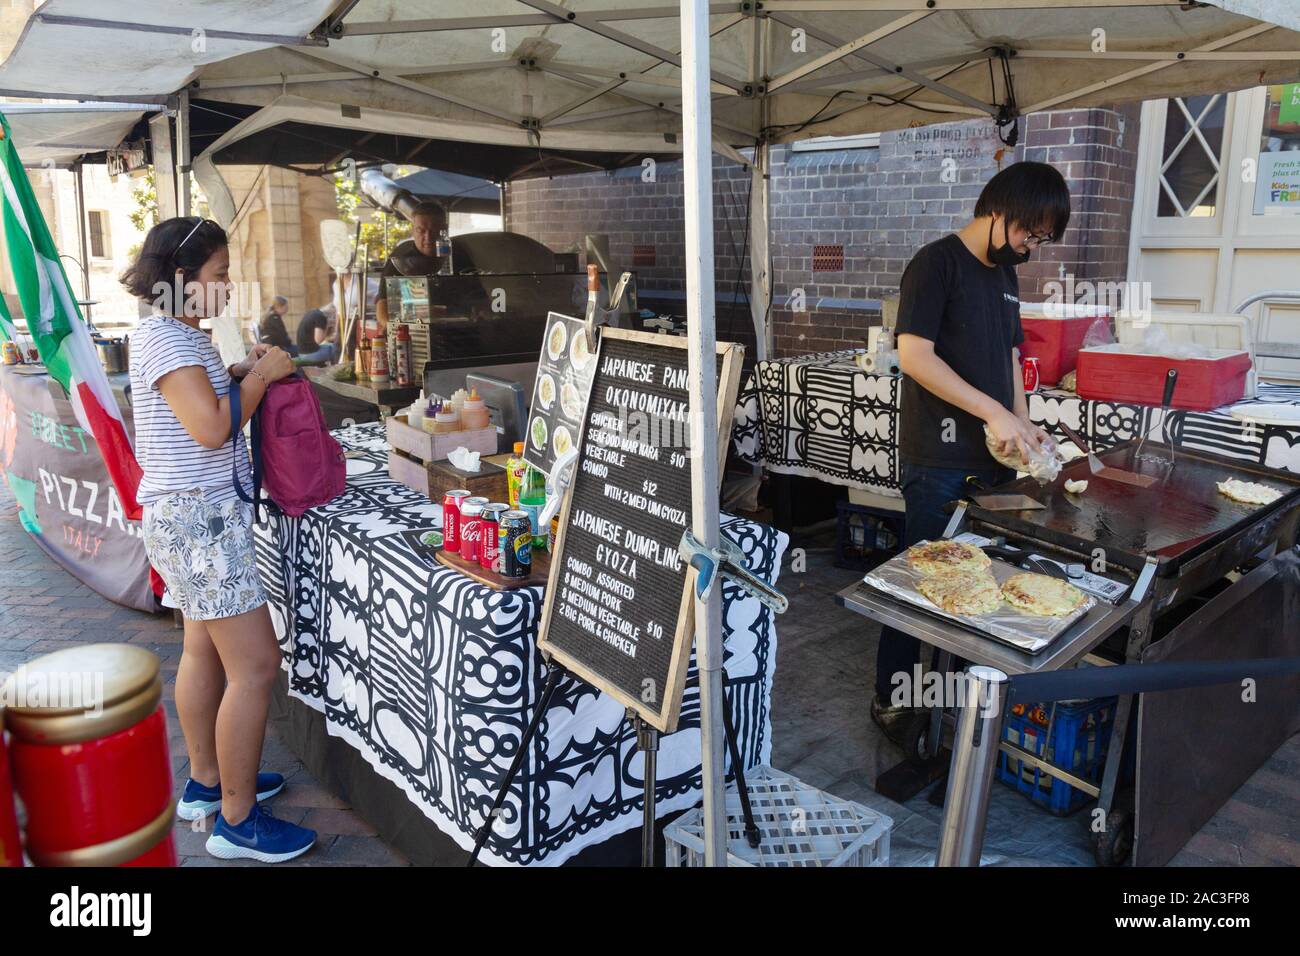 The Rocks market Sydney Australia - a woman buying street food at a market stall at the weekend market in The Rocks area of Sydney, Australia Stock Photo